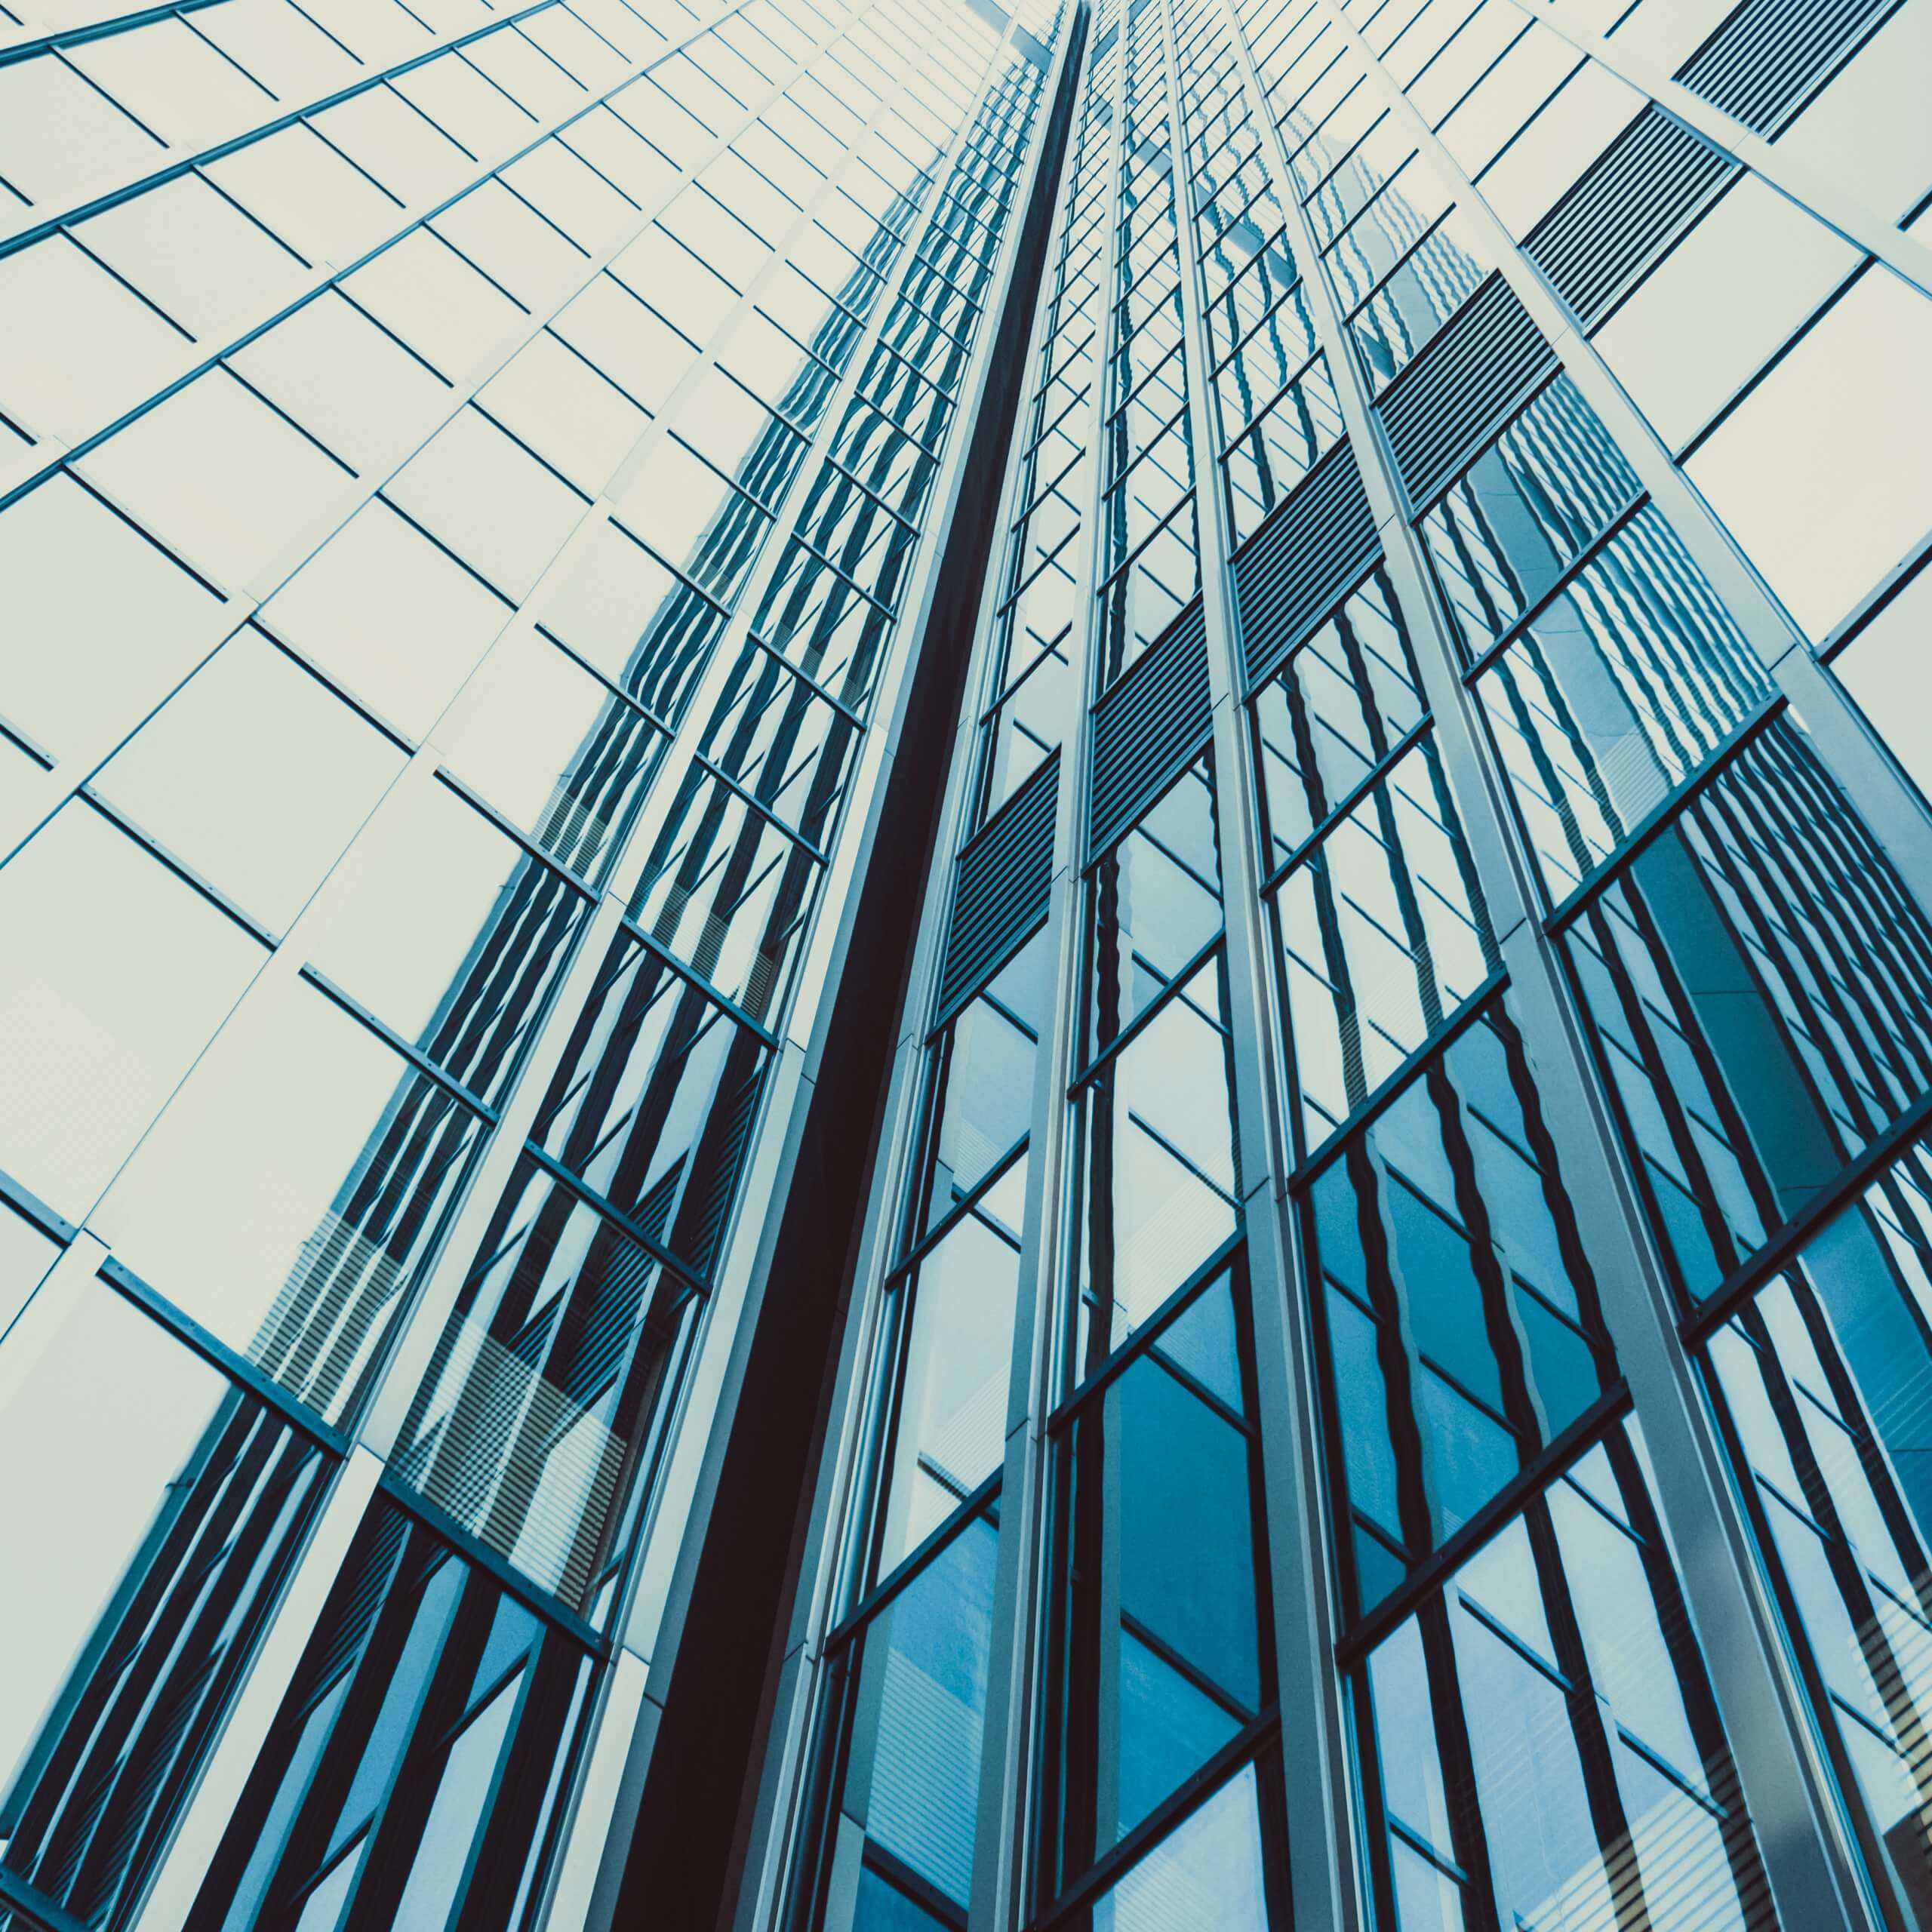 An abstract image of some office buildings. A visual metaphor for the topic of this series, Sponsorship requirements to work in the UK